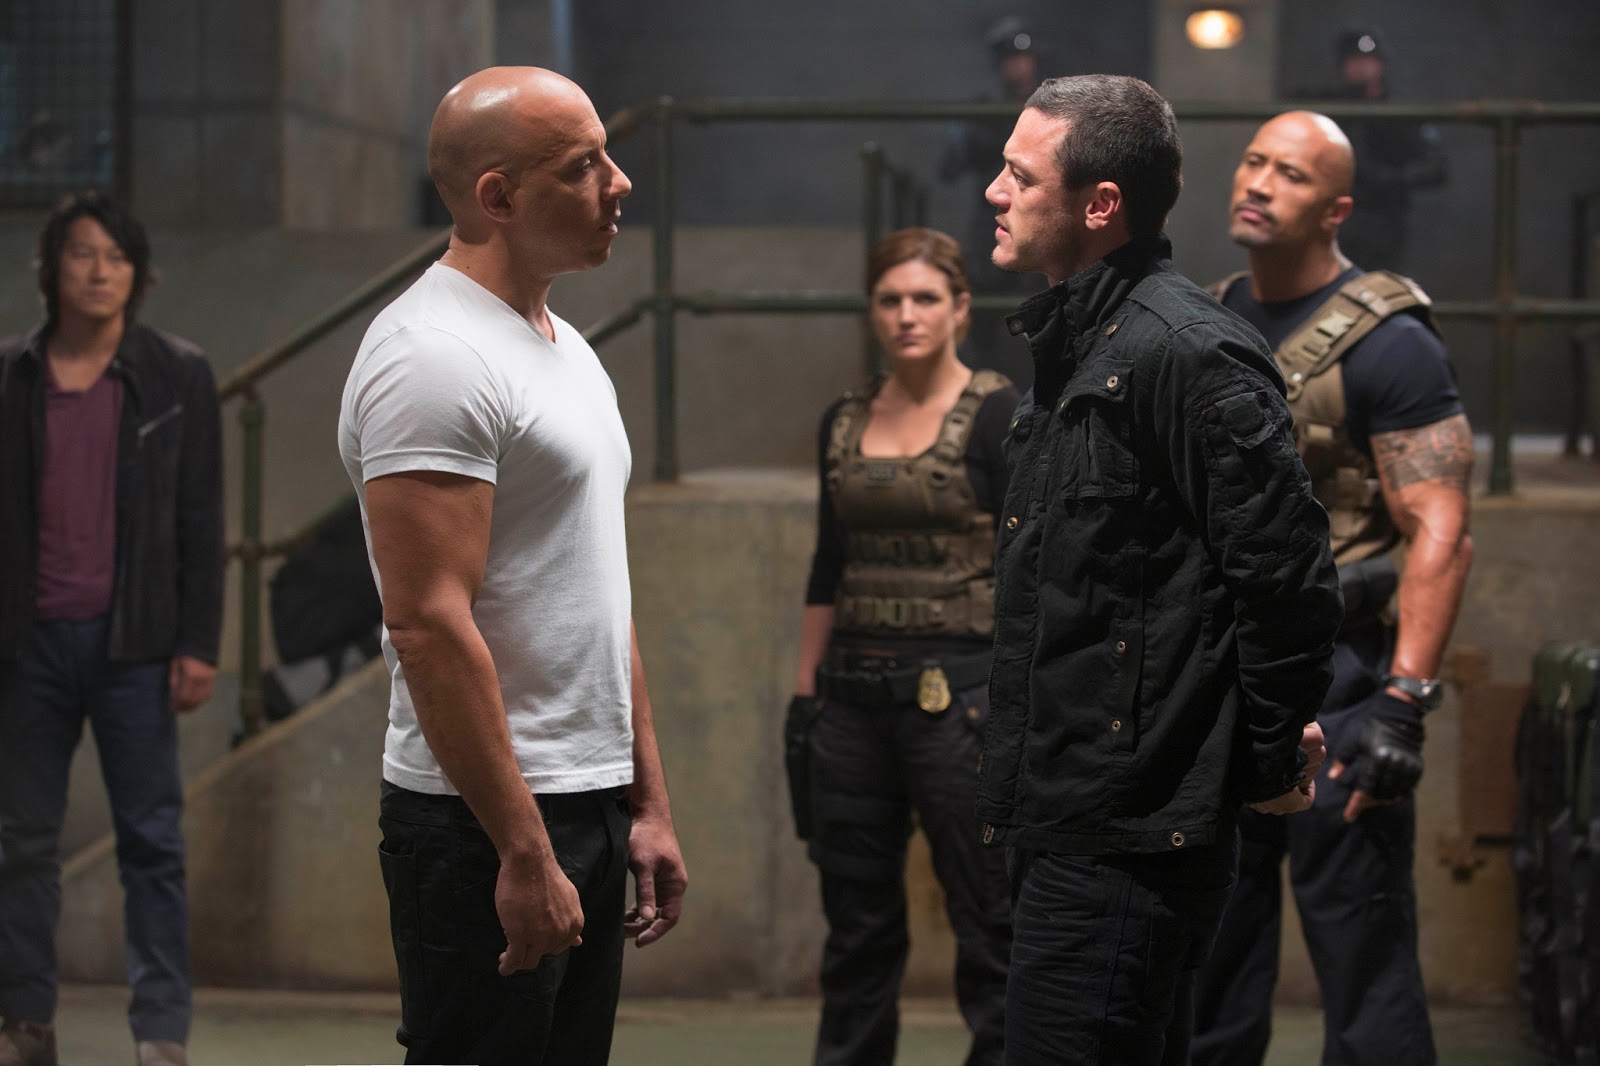 fast and furious, Hobbs asks Dom to help him fight Owen- in exchange for which, the whole crew will be pardoned.